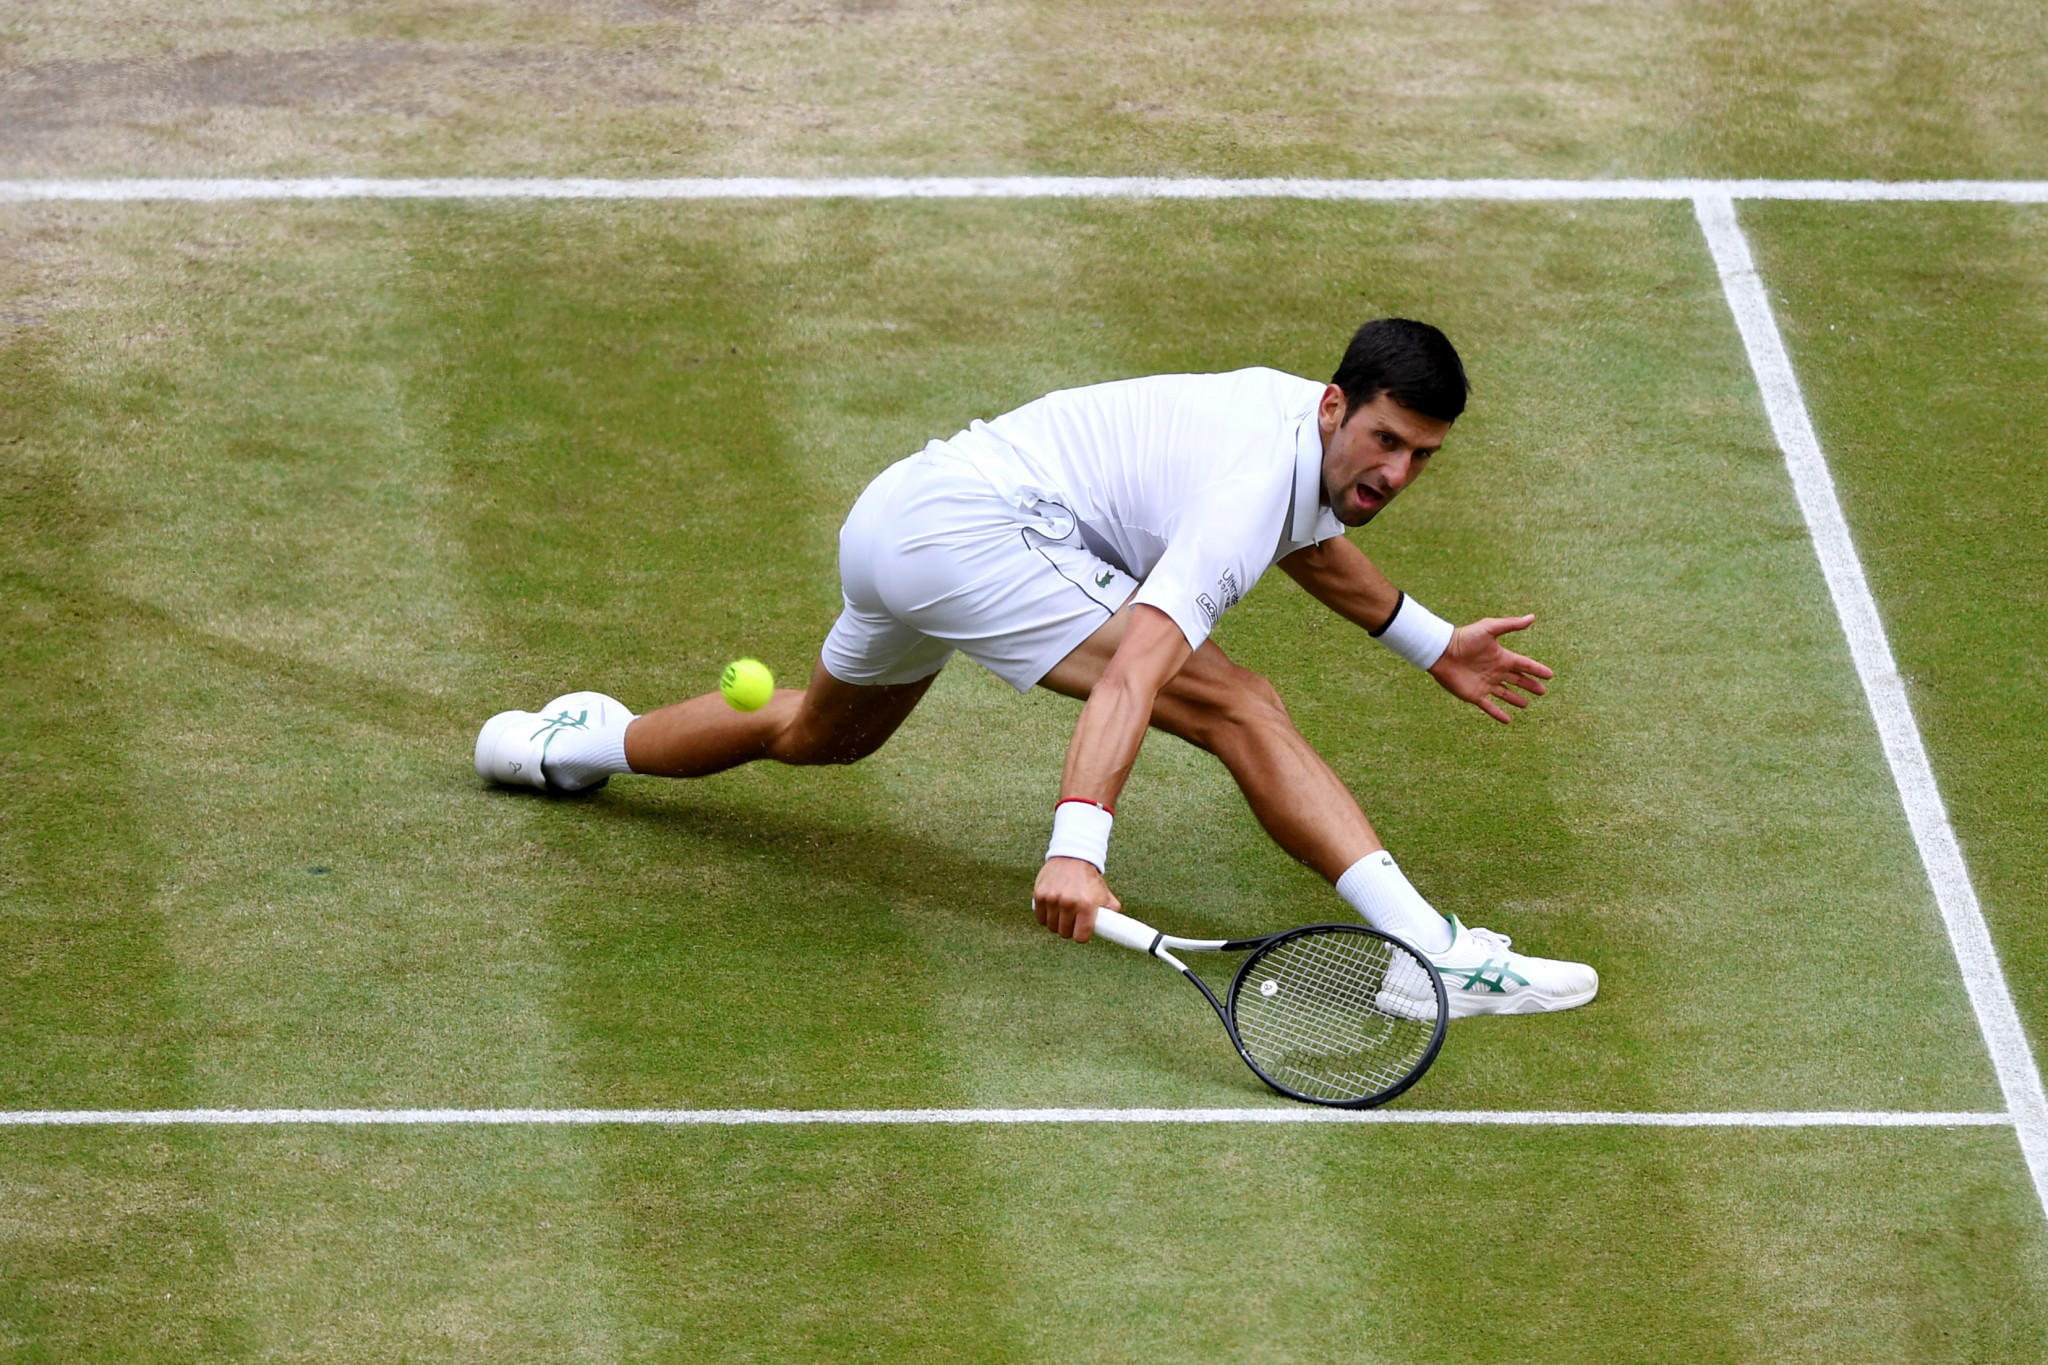 Djokovic was at full stretch to make this particular backhand ©Getty Images